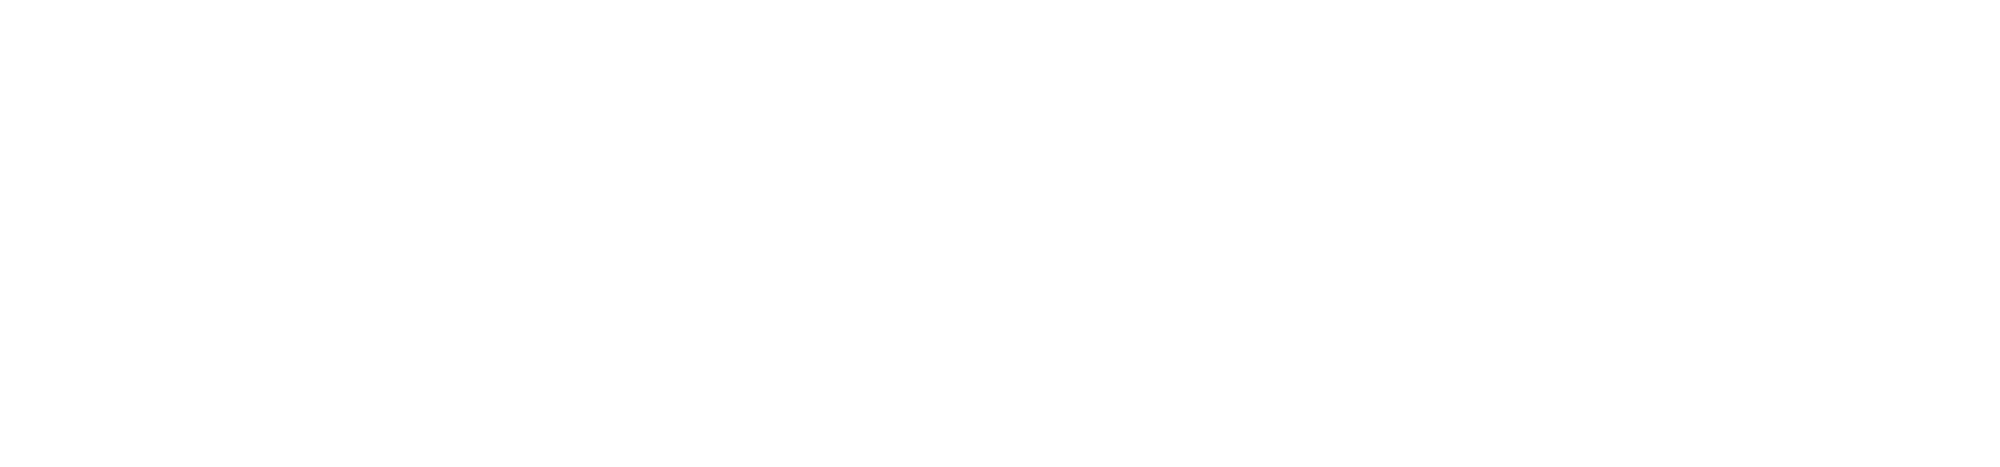 Coalition to Protect American Workers - Building America's Future